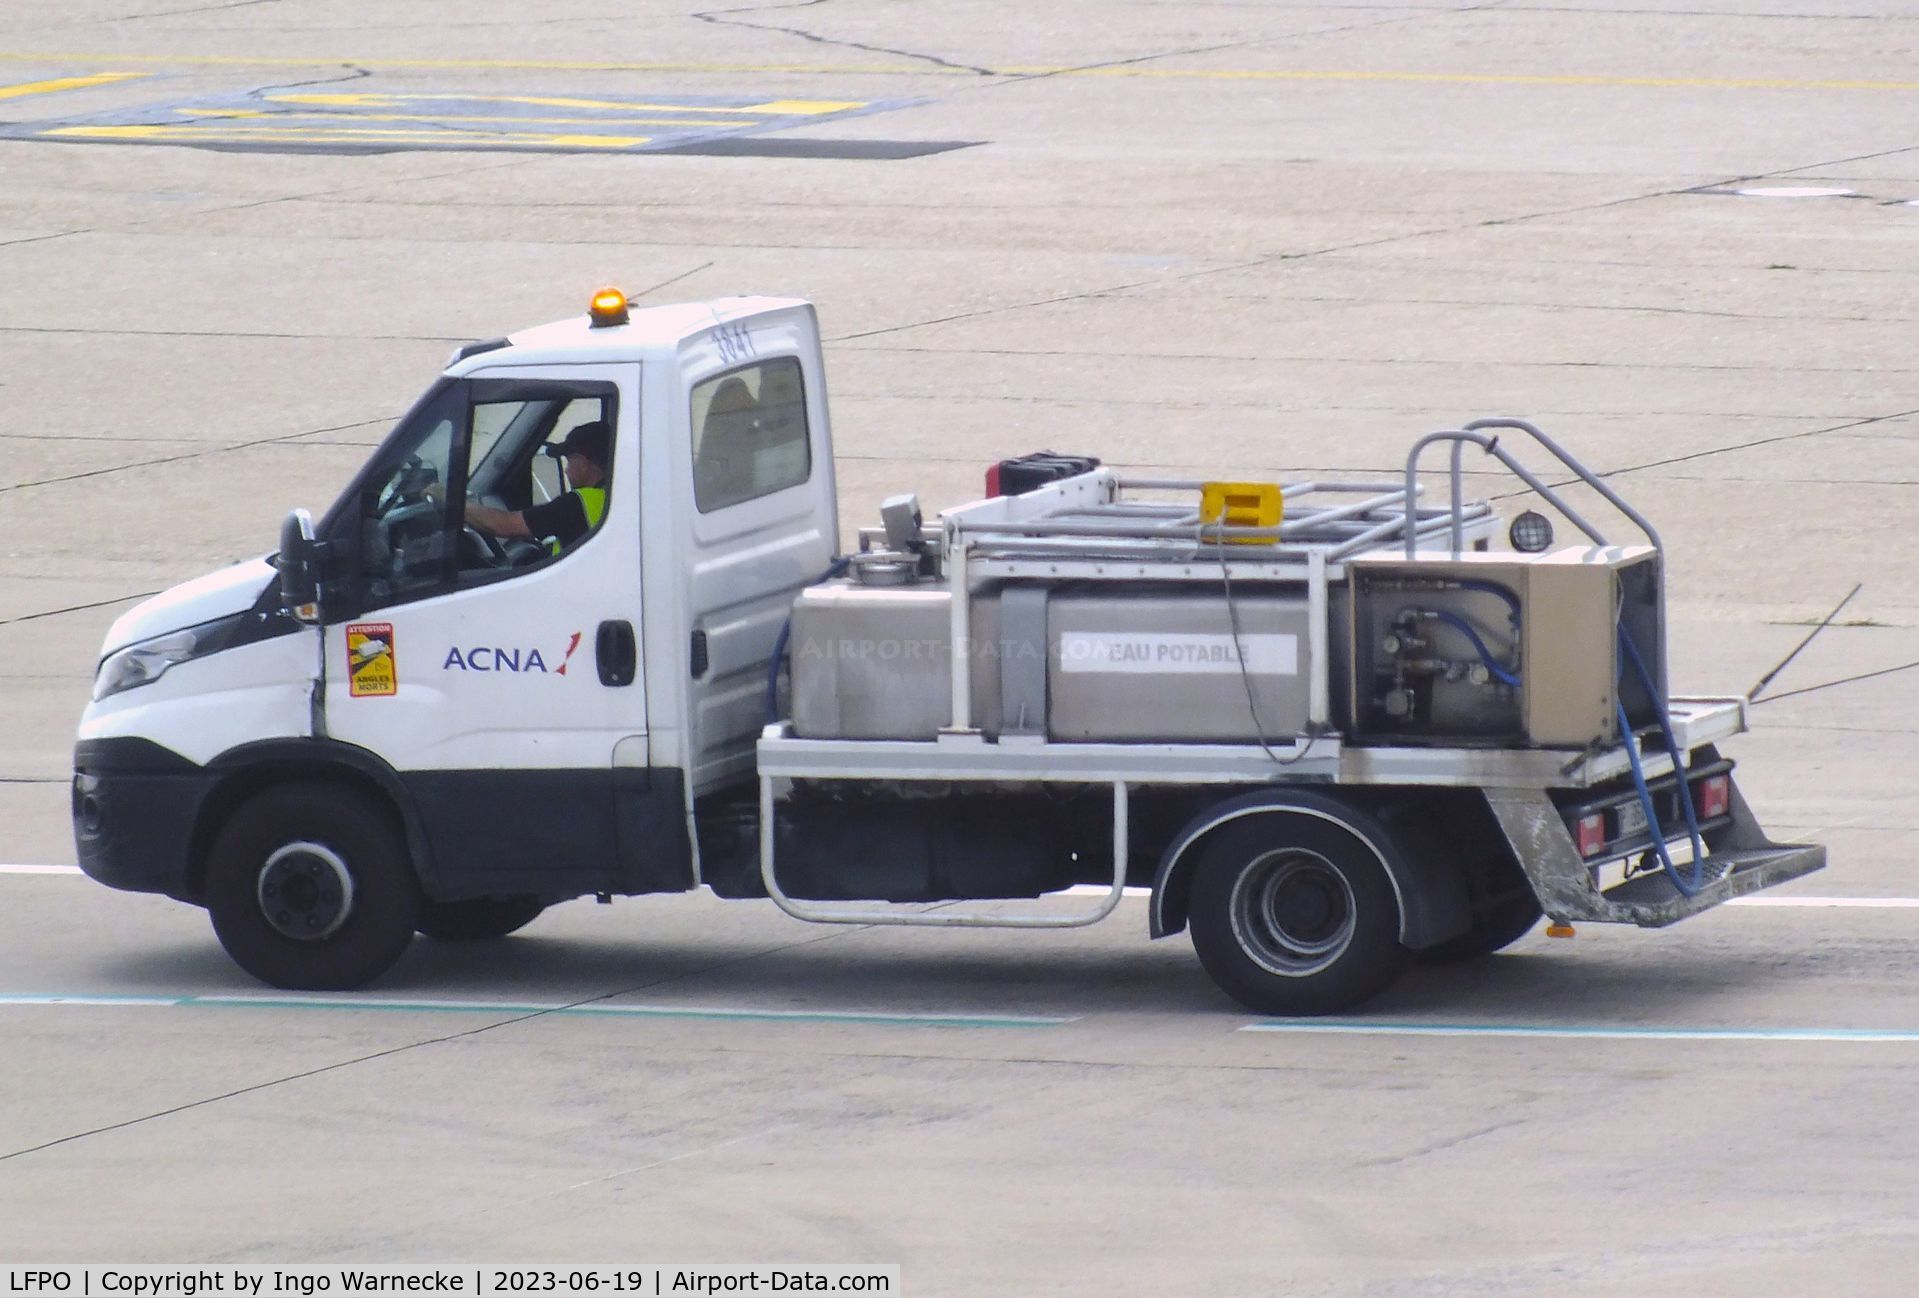 Paris Orly Airport, Orly (near Paris) France (LFPO) - potable water truck at Paris/Orly airport